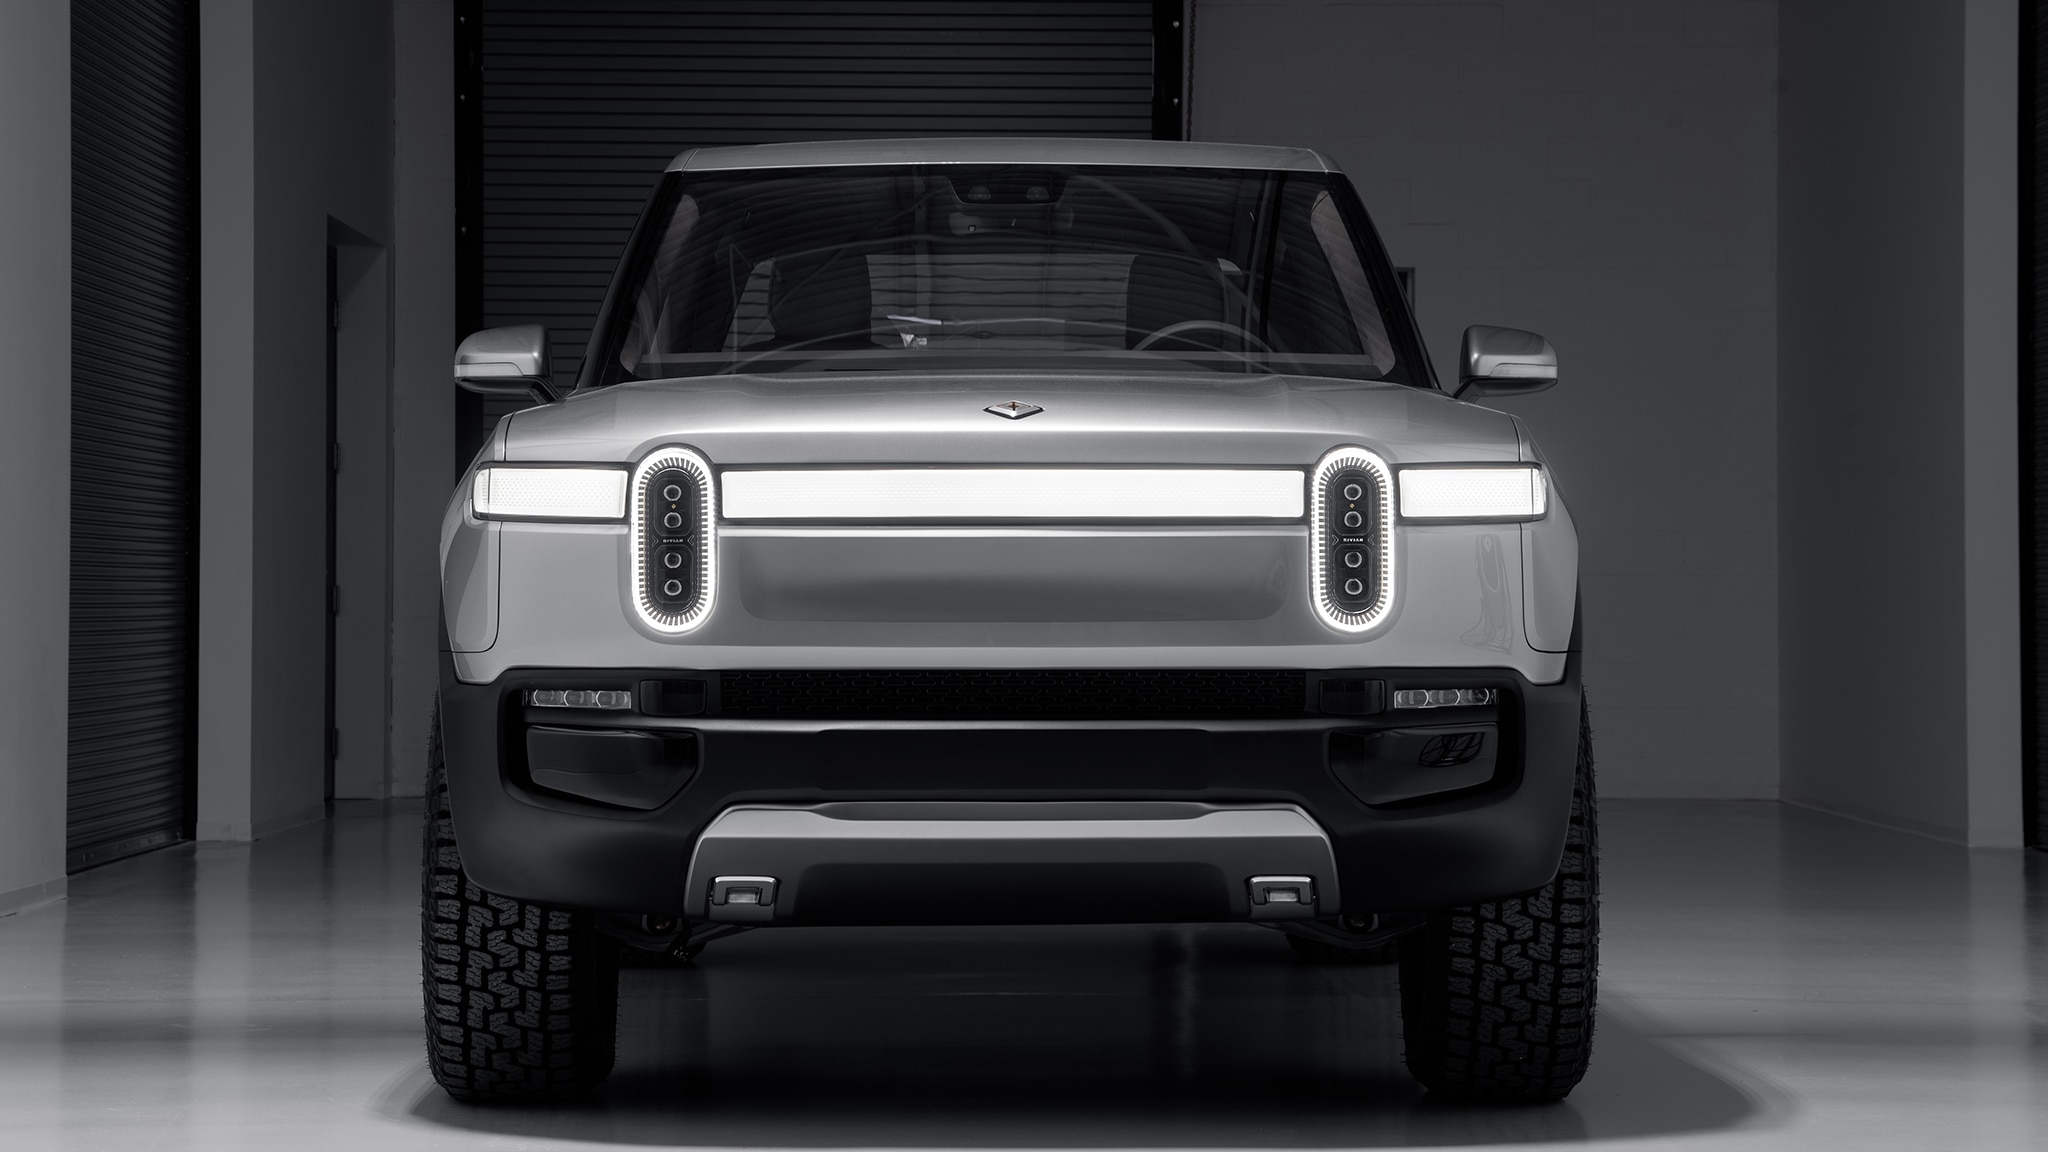 Catch It While You Can: GM and Amazon Reportedly to Invest in Rivian